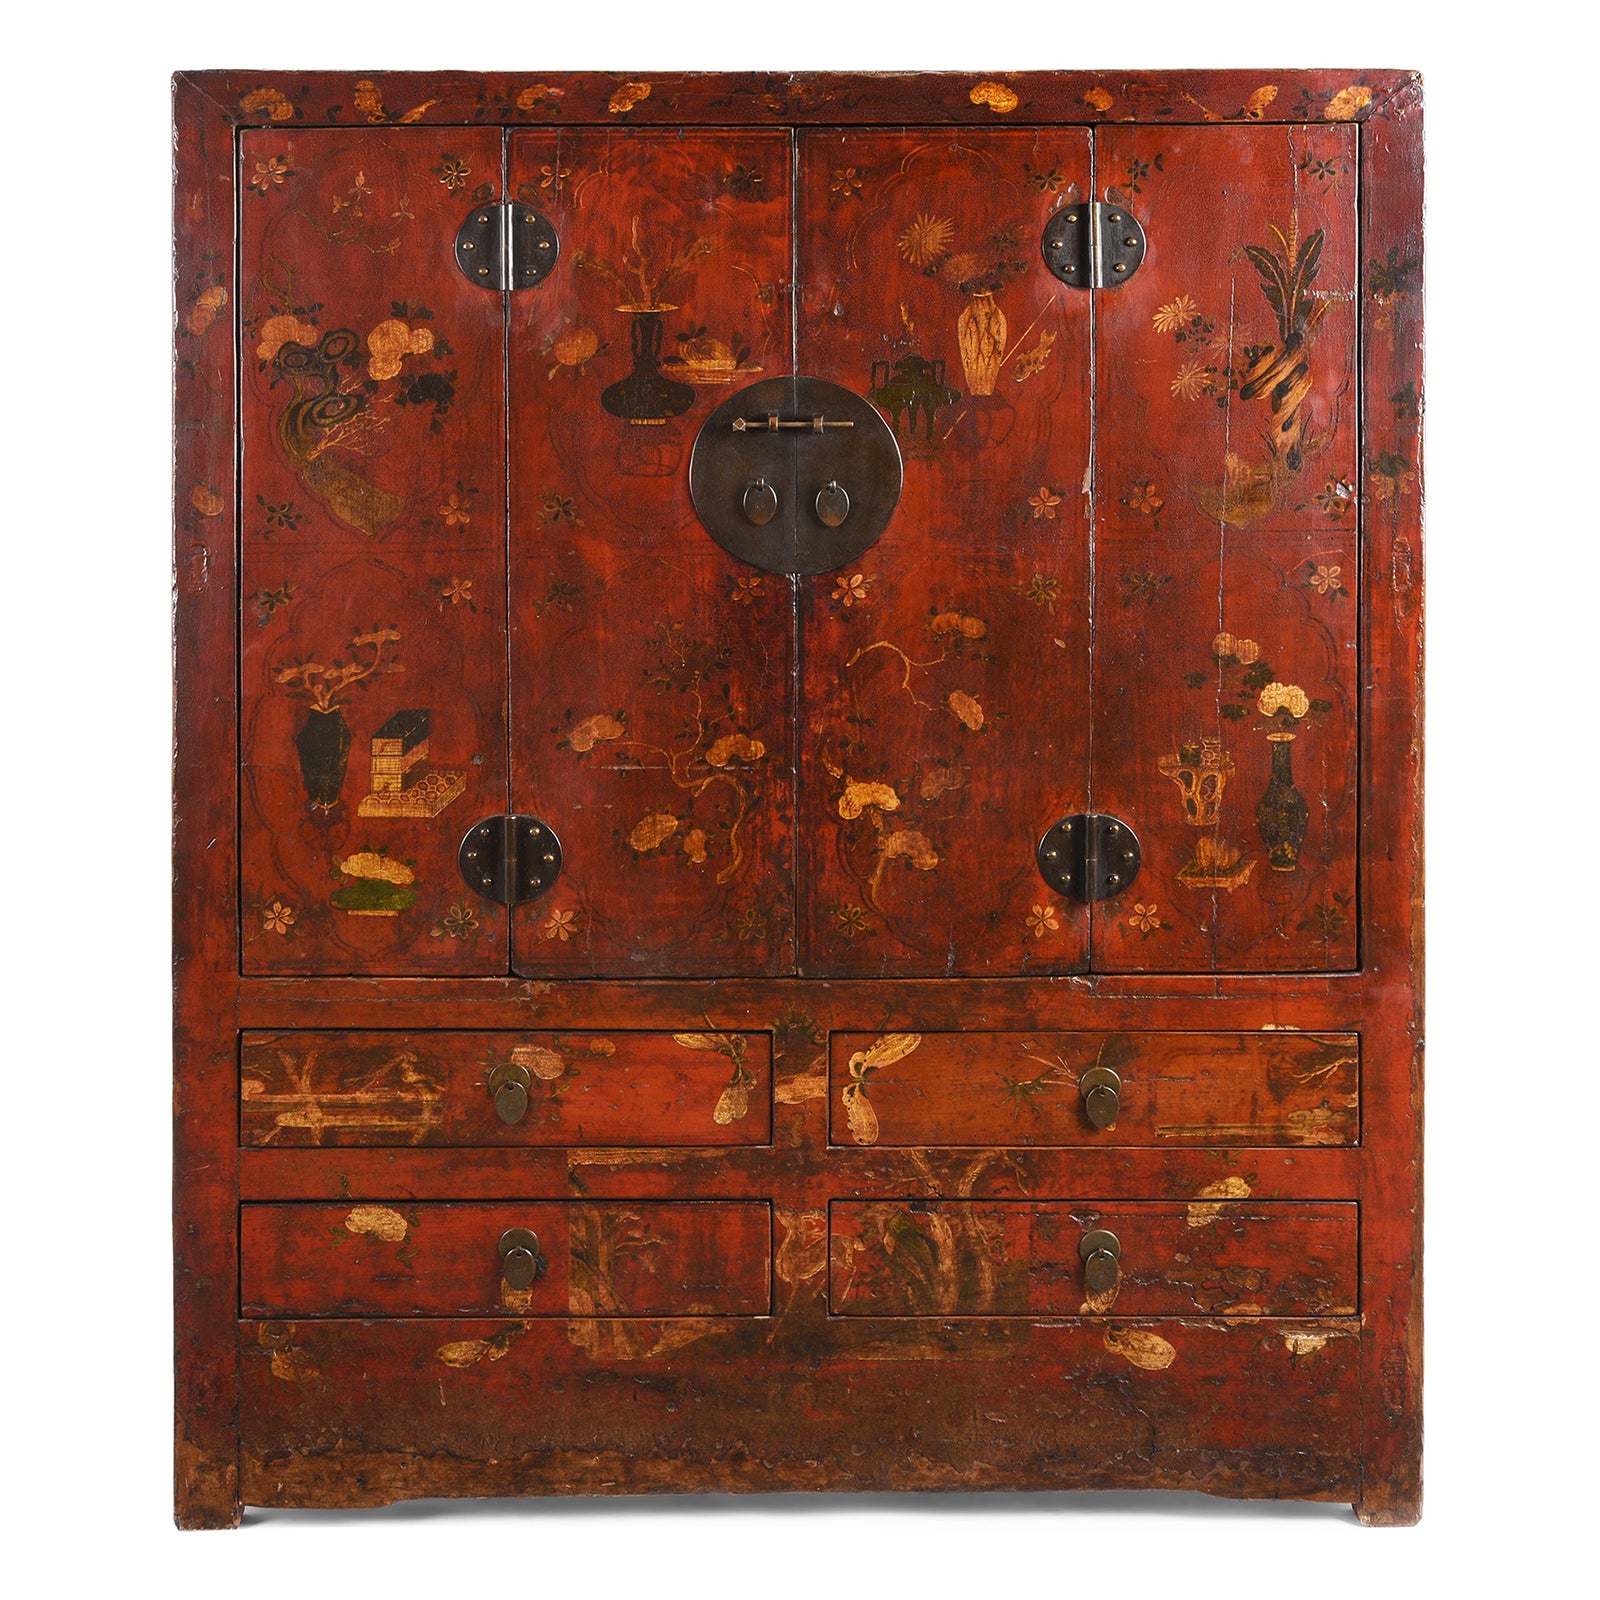 Antique Gilt Chinese Painted Cabinet From Gansu | Indigo Antiques